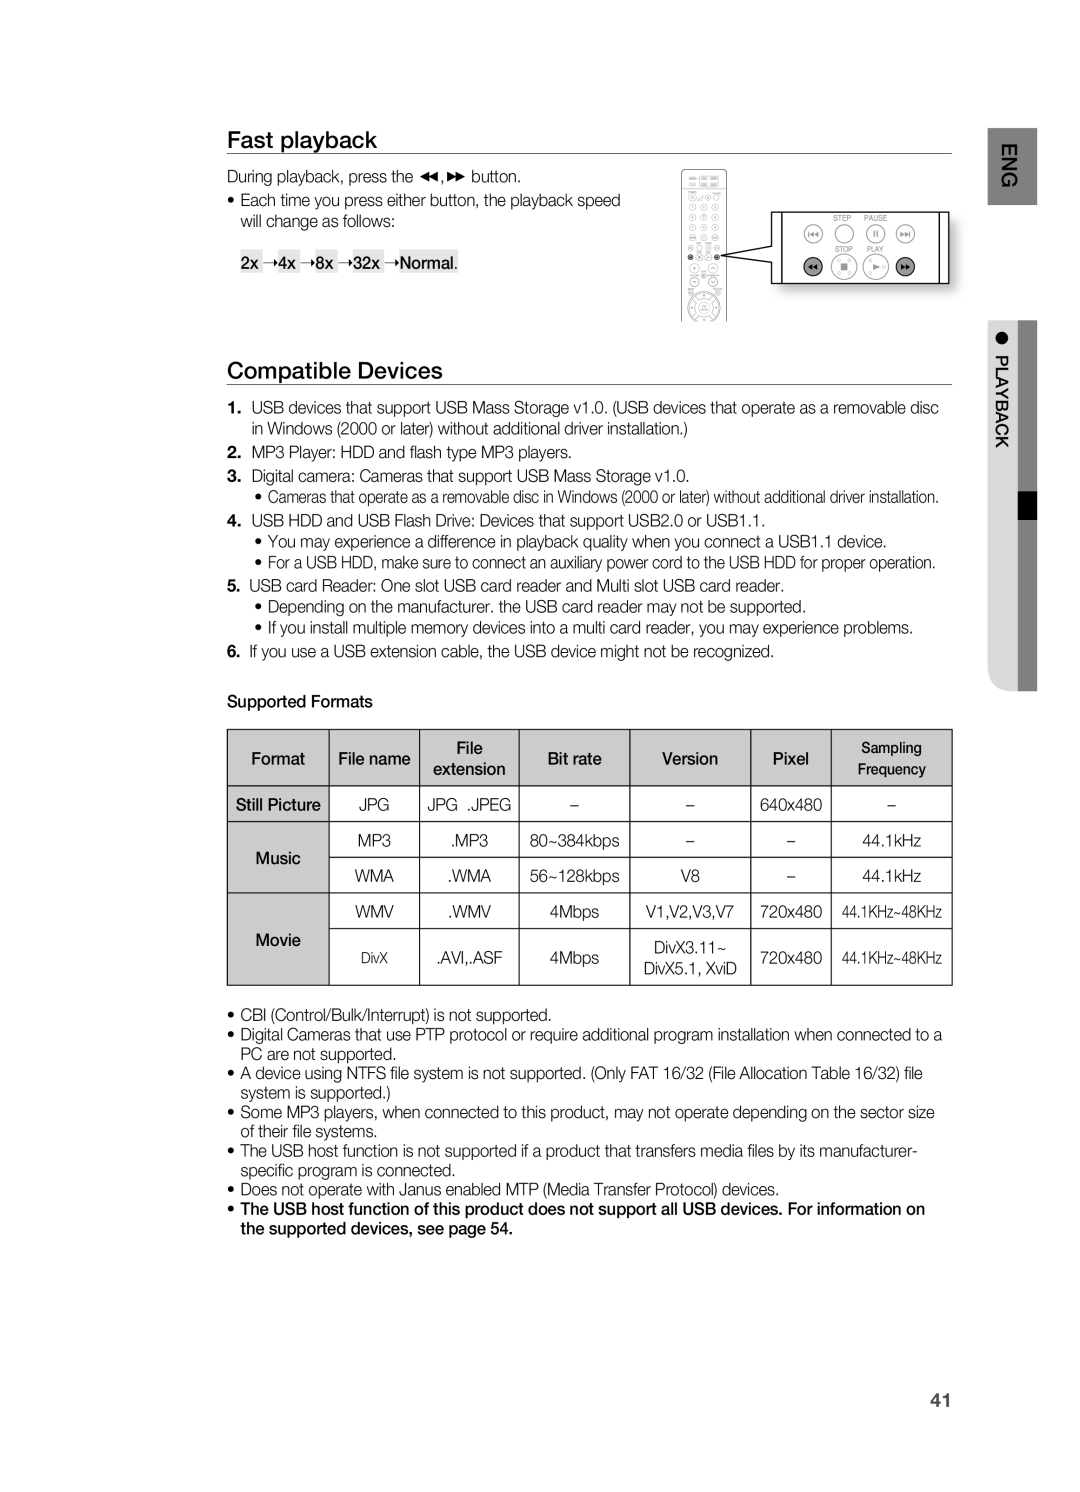 Samsung HT-A100 user manual Fast playback, Compatible Devices 